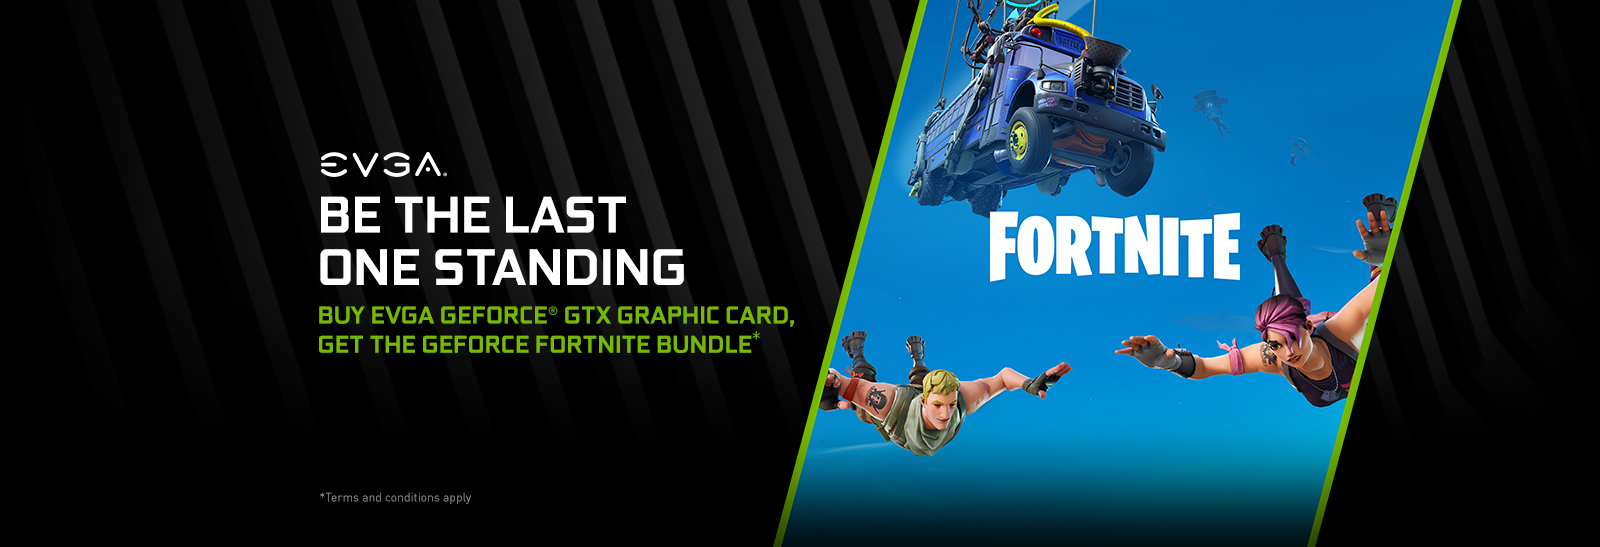 collect your code - gtx 950m fortnite